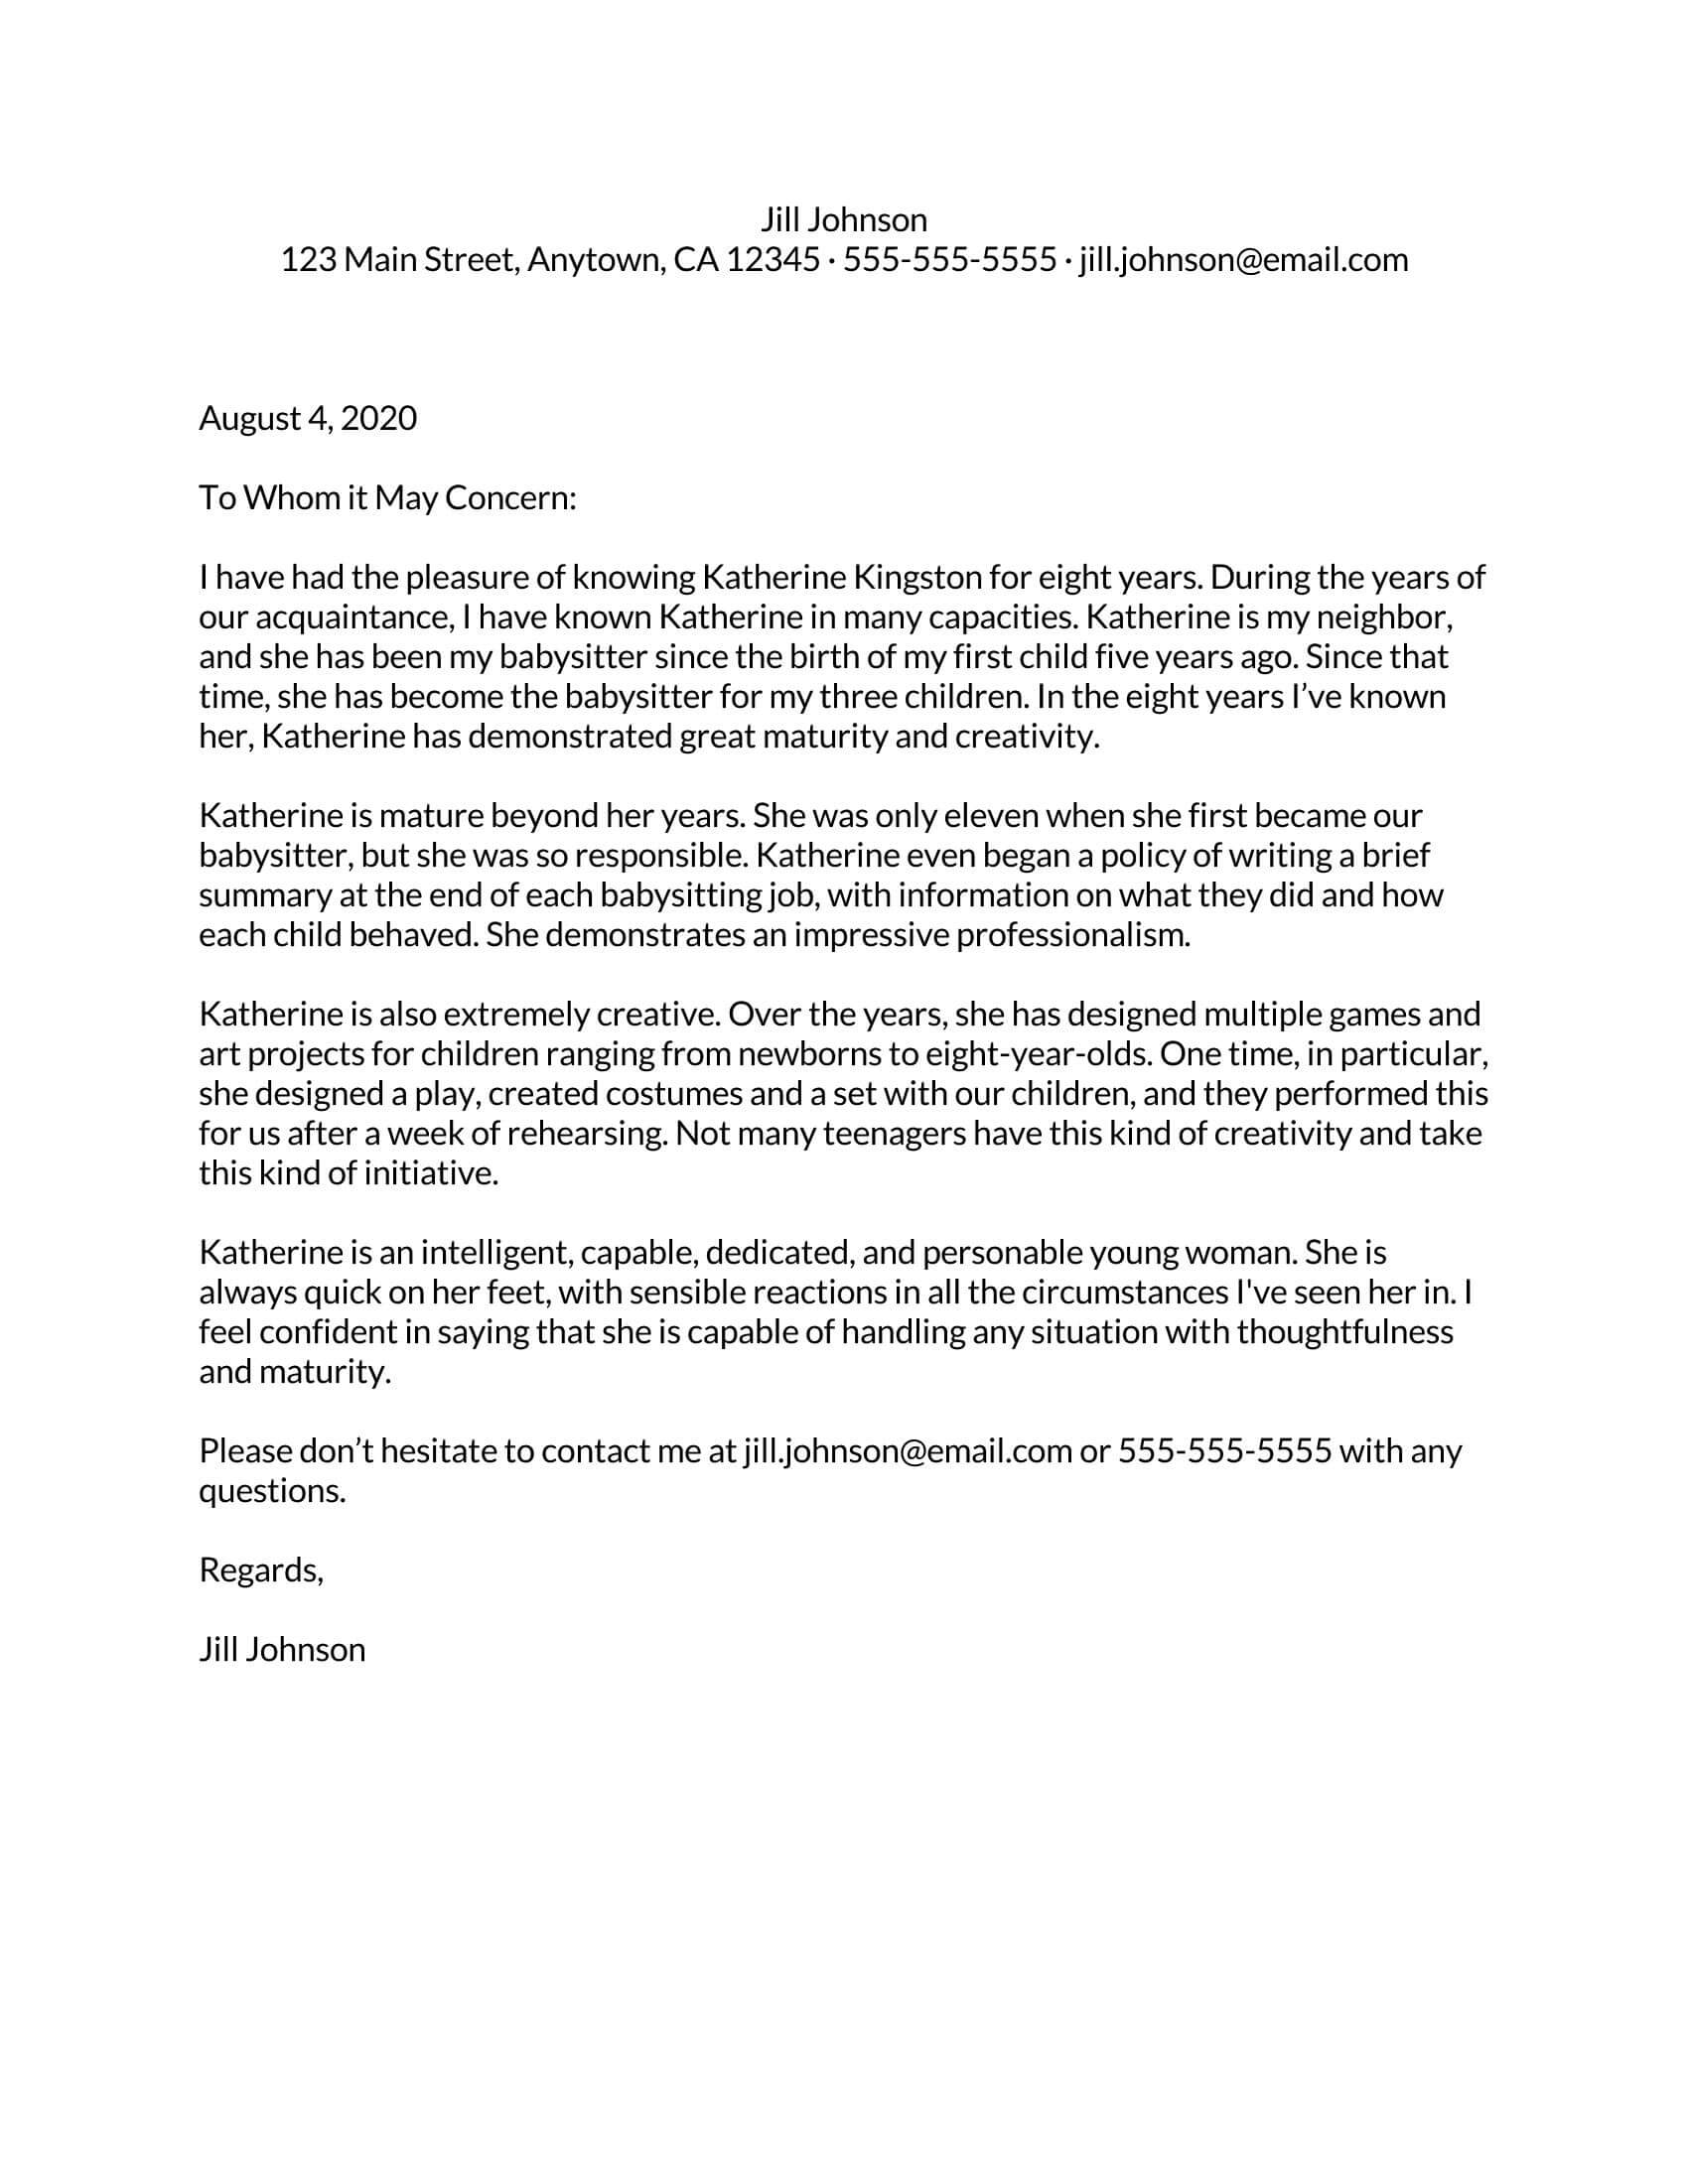 Reference letter template with free download